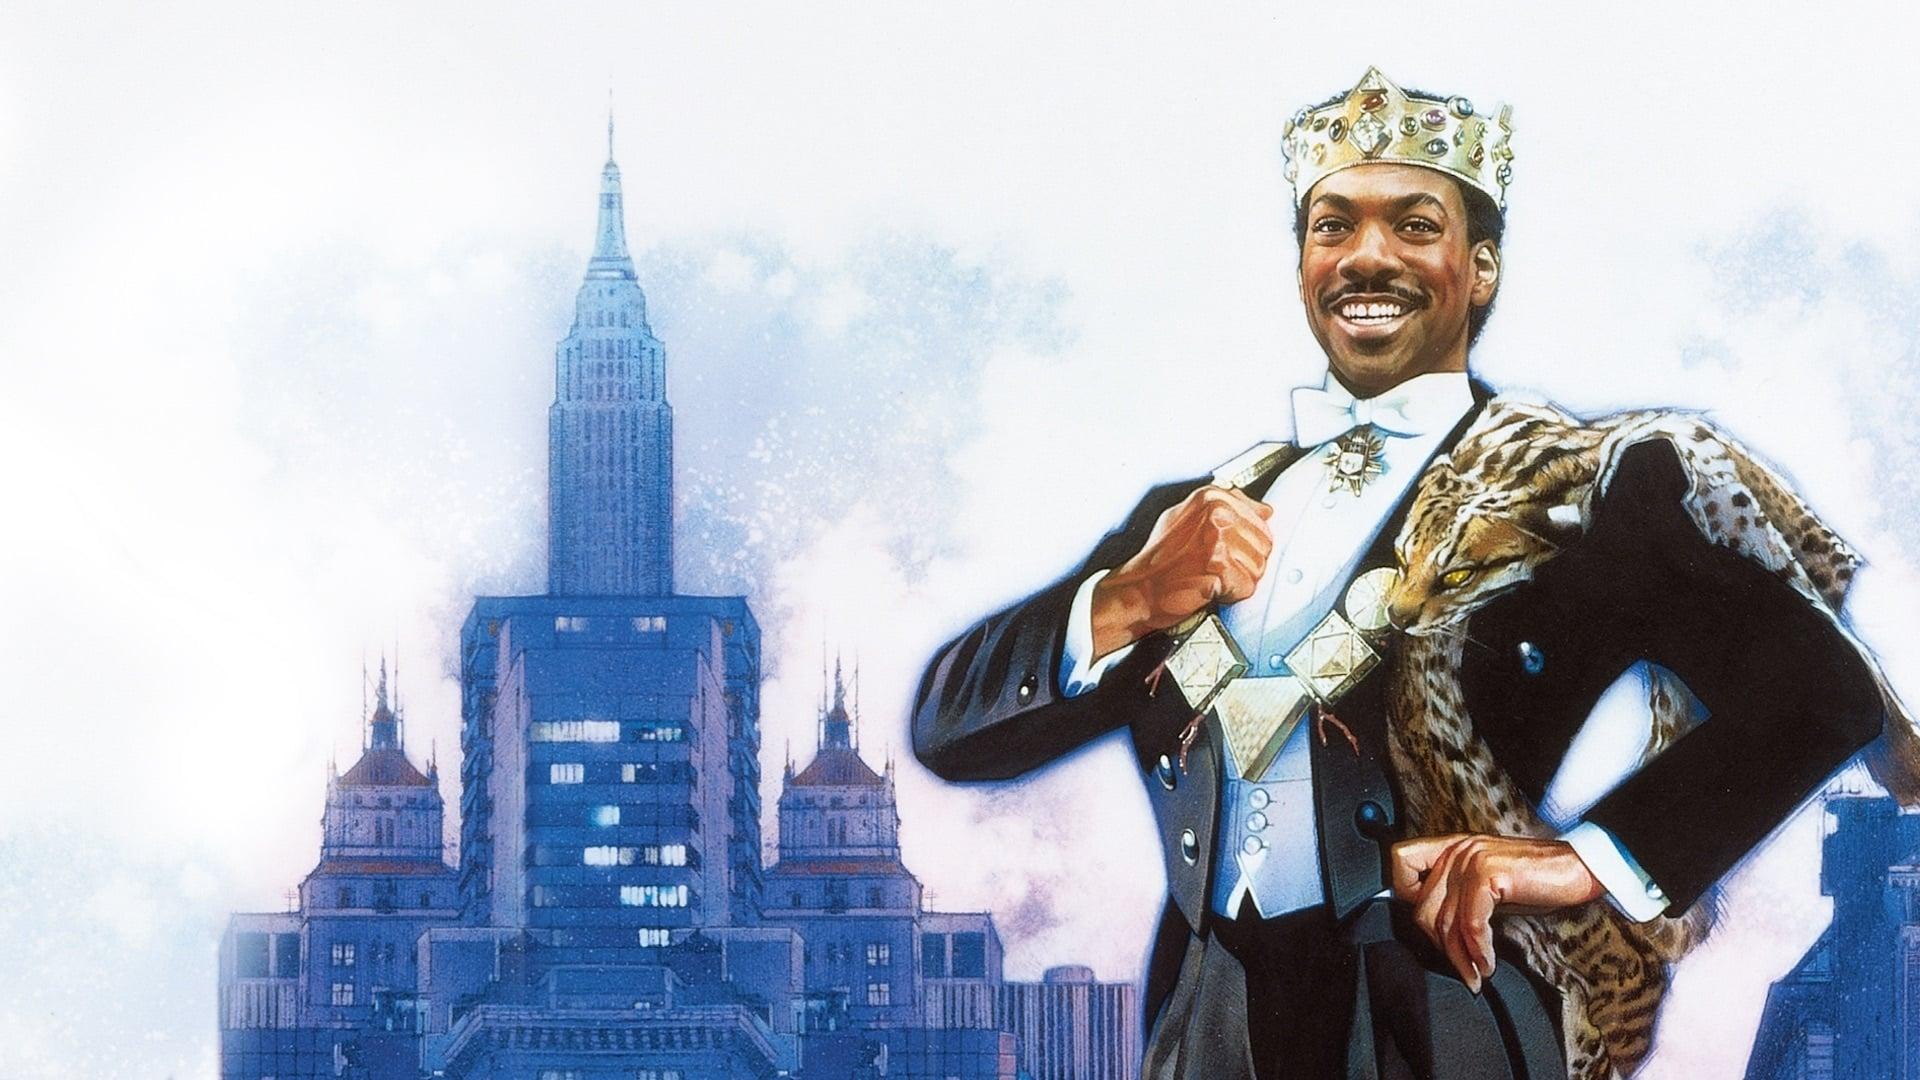 Coming to America backdrop